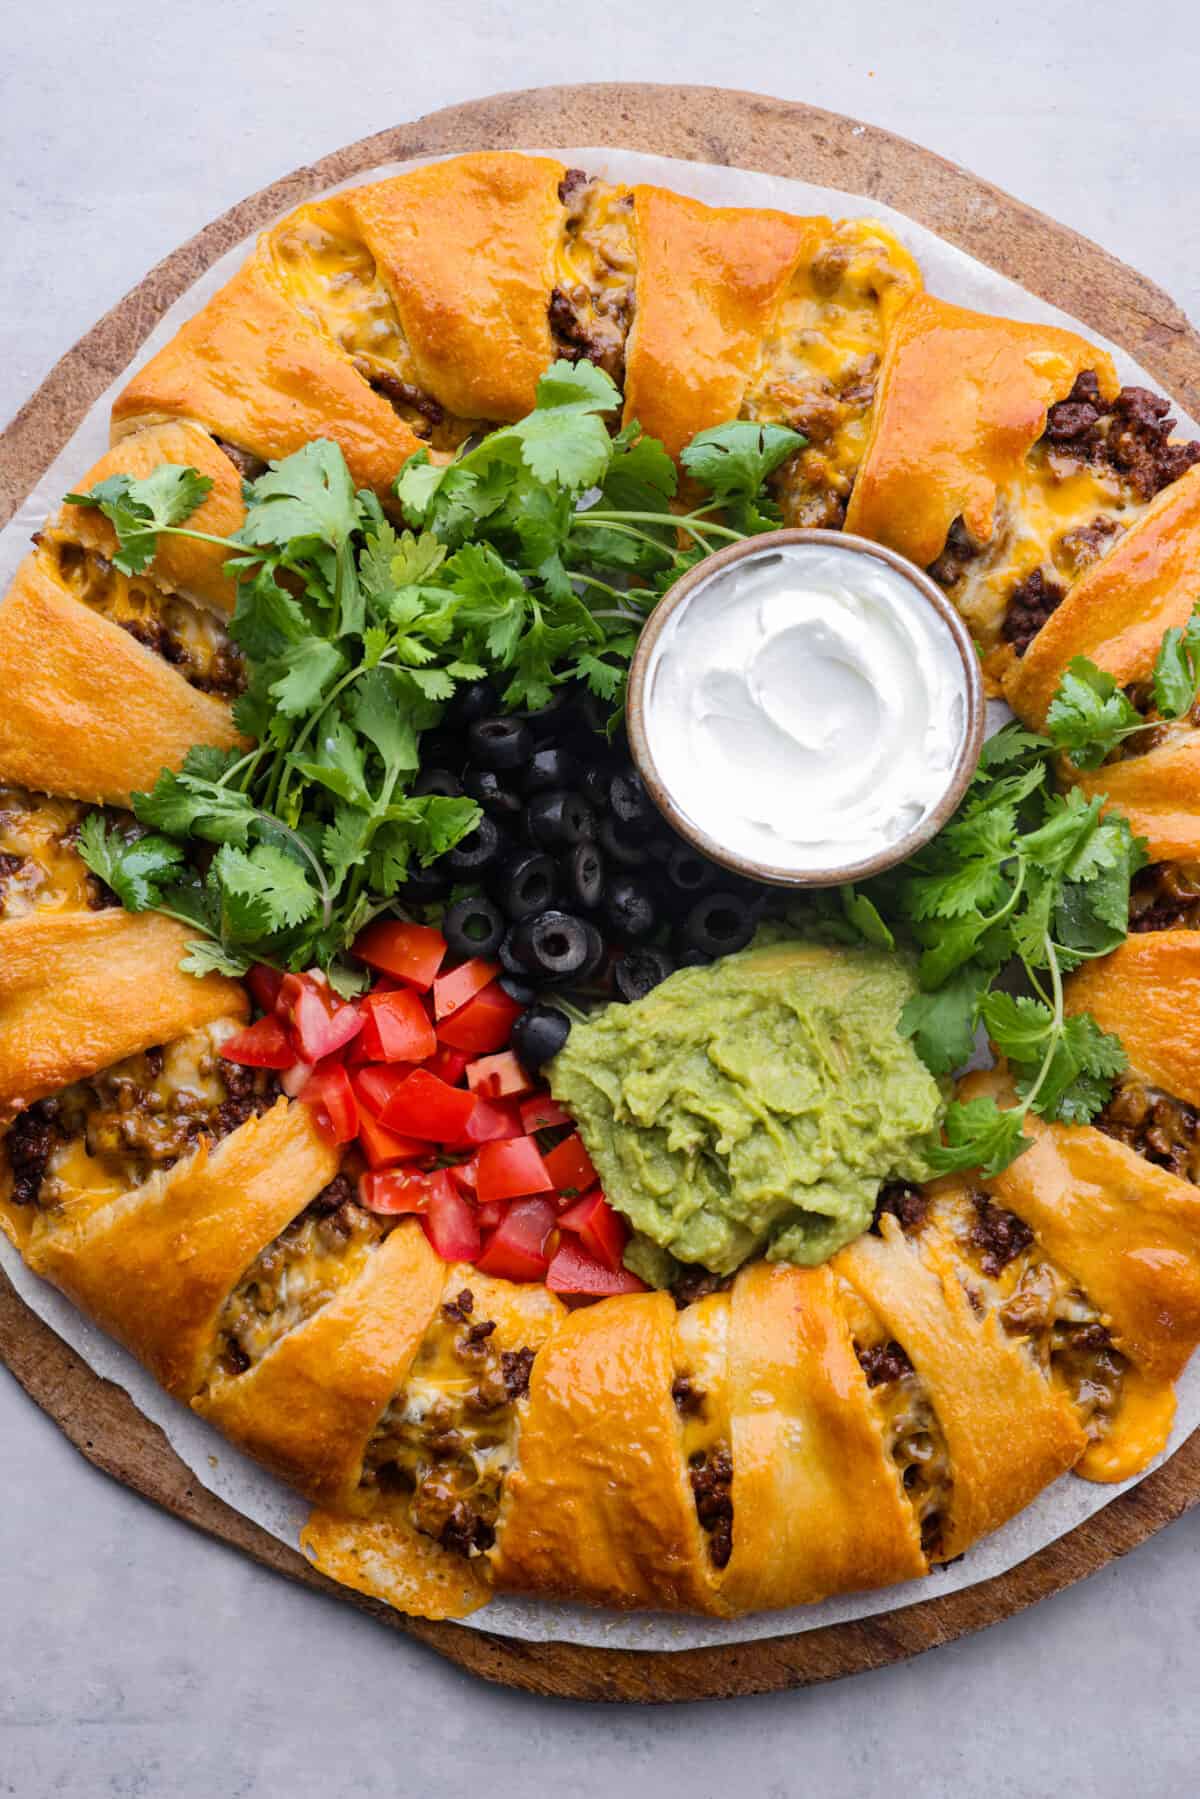 A whole taco ring, filled with servings of guacamole, sour cream, cilantro, tomatoes, and olives.